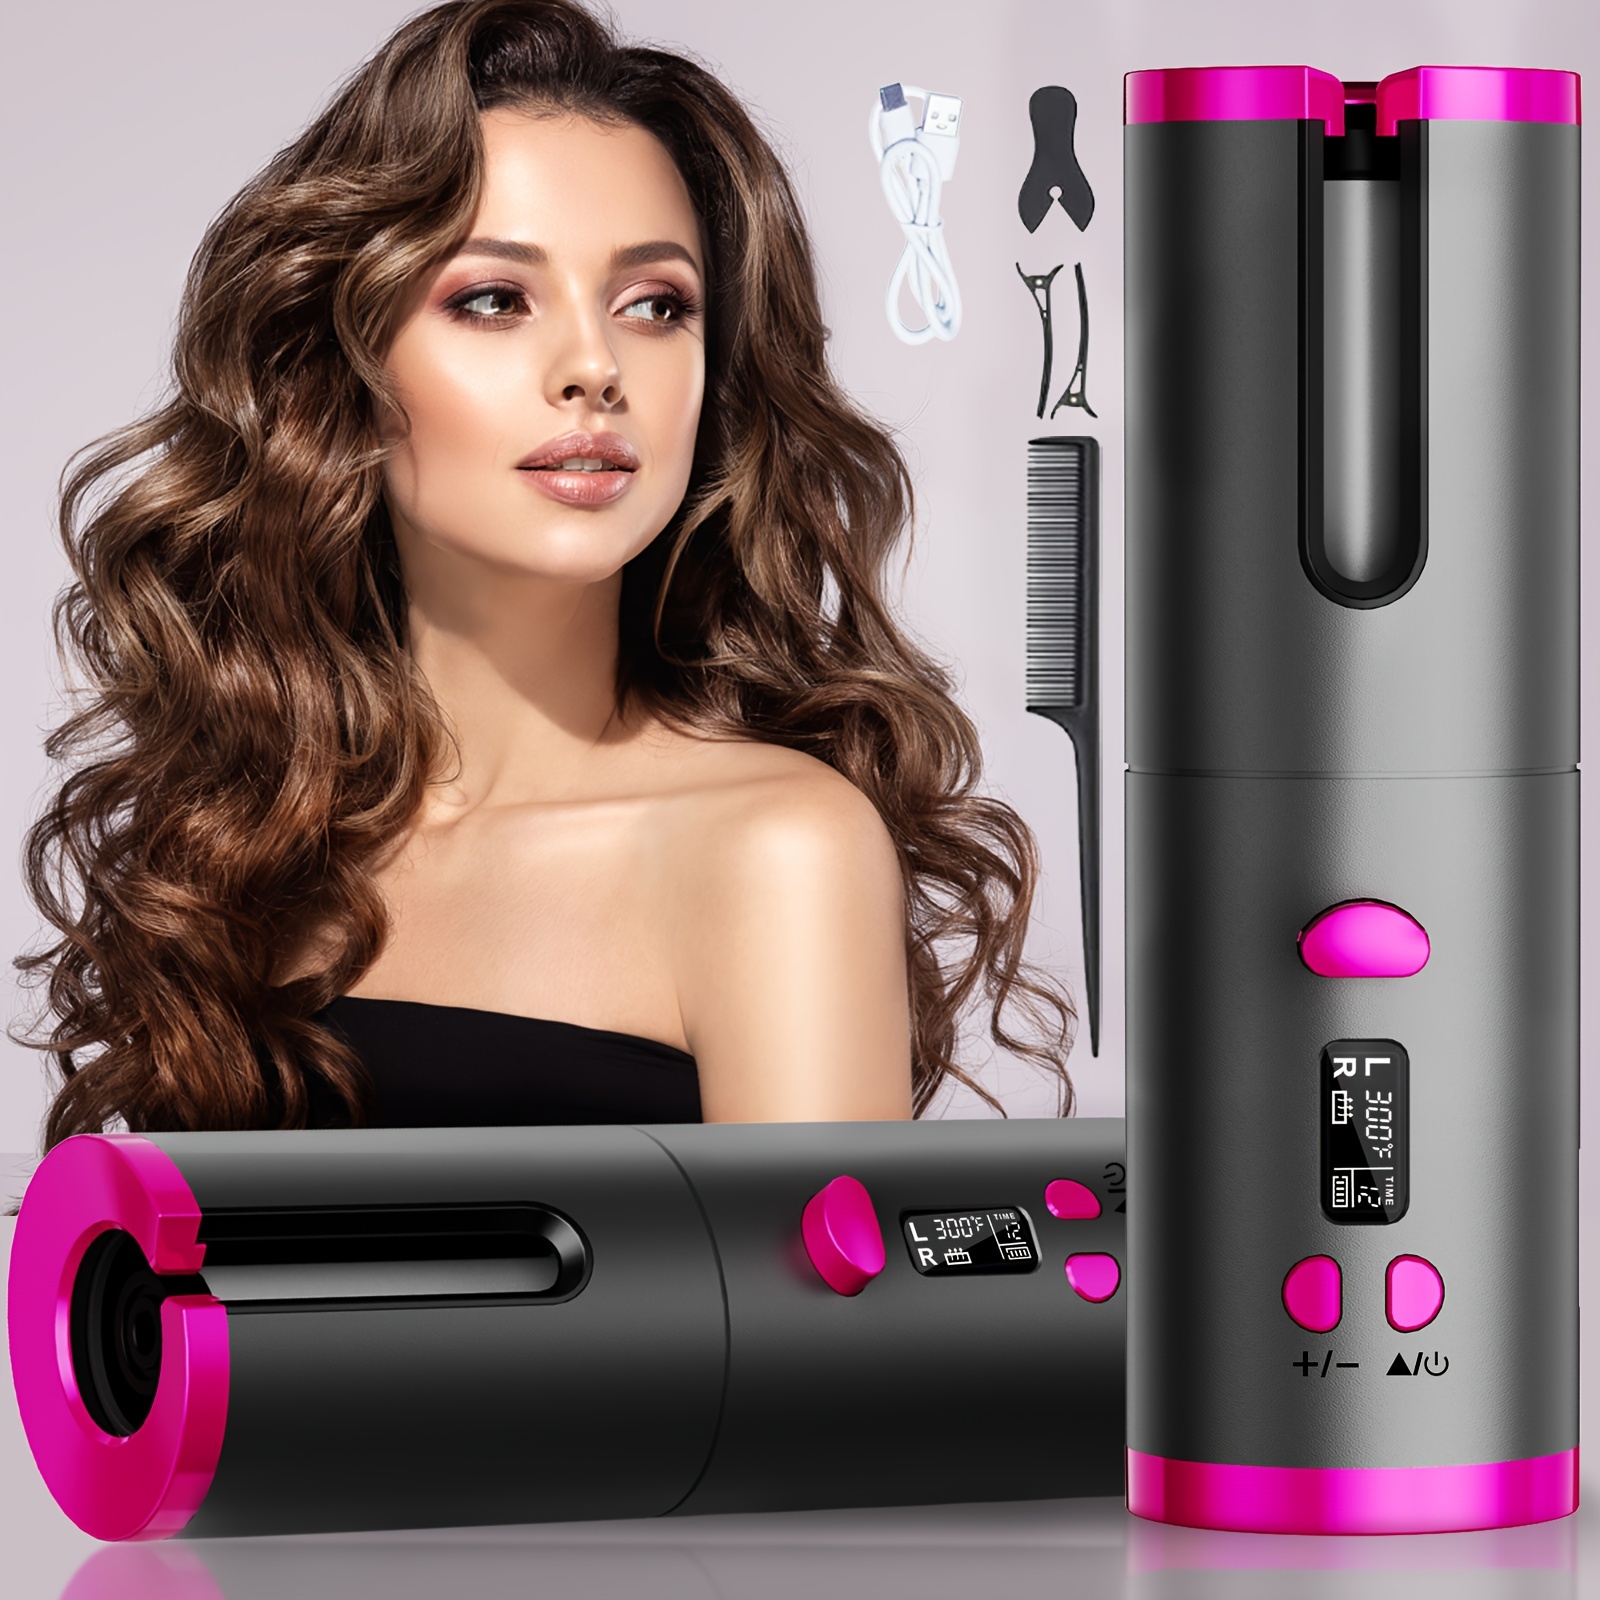 

Cordless Automatic Curling Iron - Anti-tangle, Portable Usb Rechargeable, Ceramic Barrel Swivel For Long Hair, Quick Heating For Hairstyles